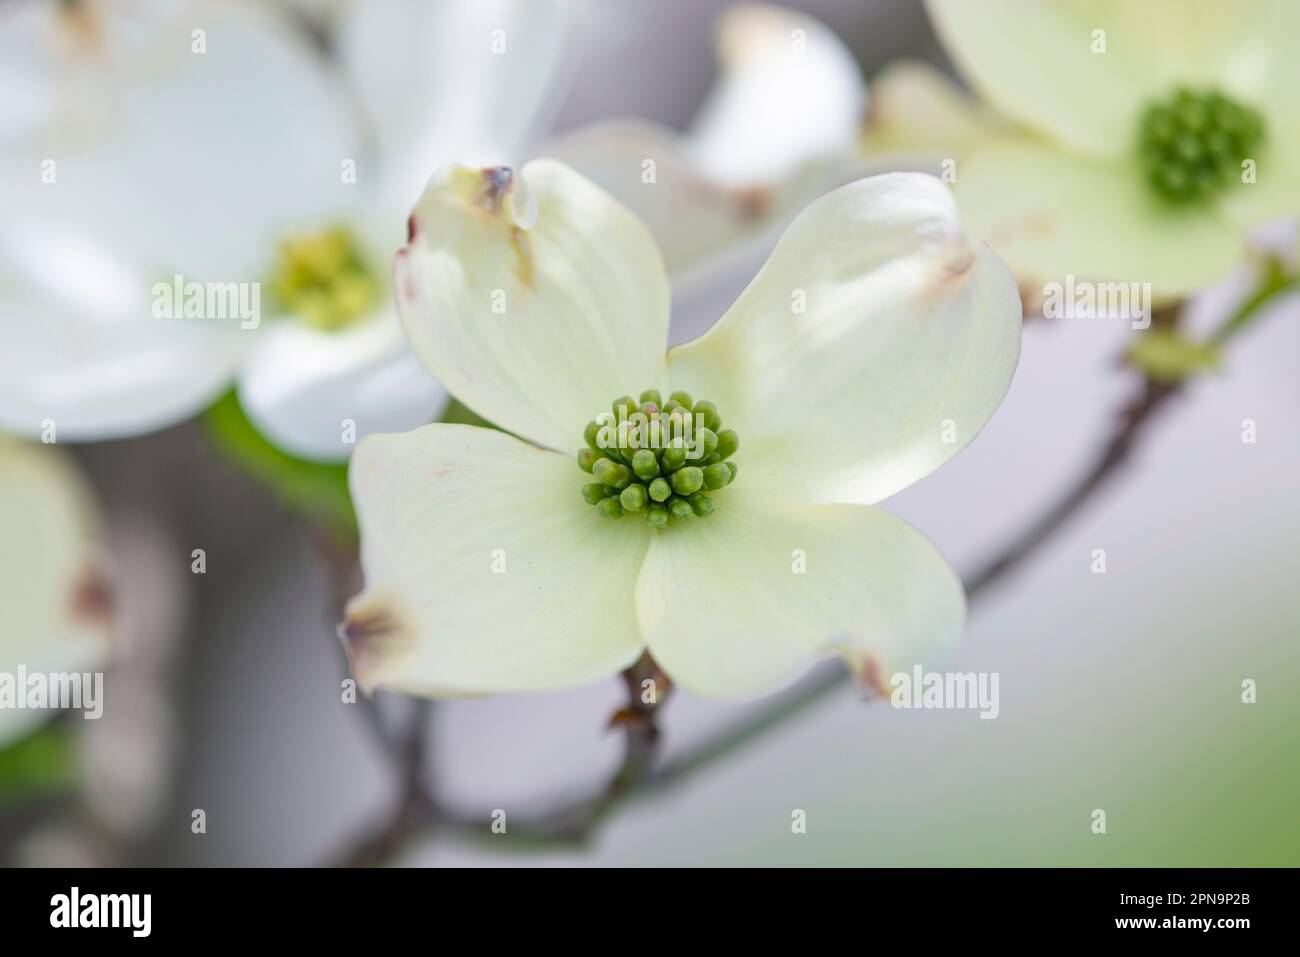 Horizontal shot of a Dogwood blossom with shallow depth of field. Stock Photo